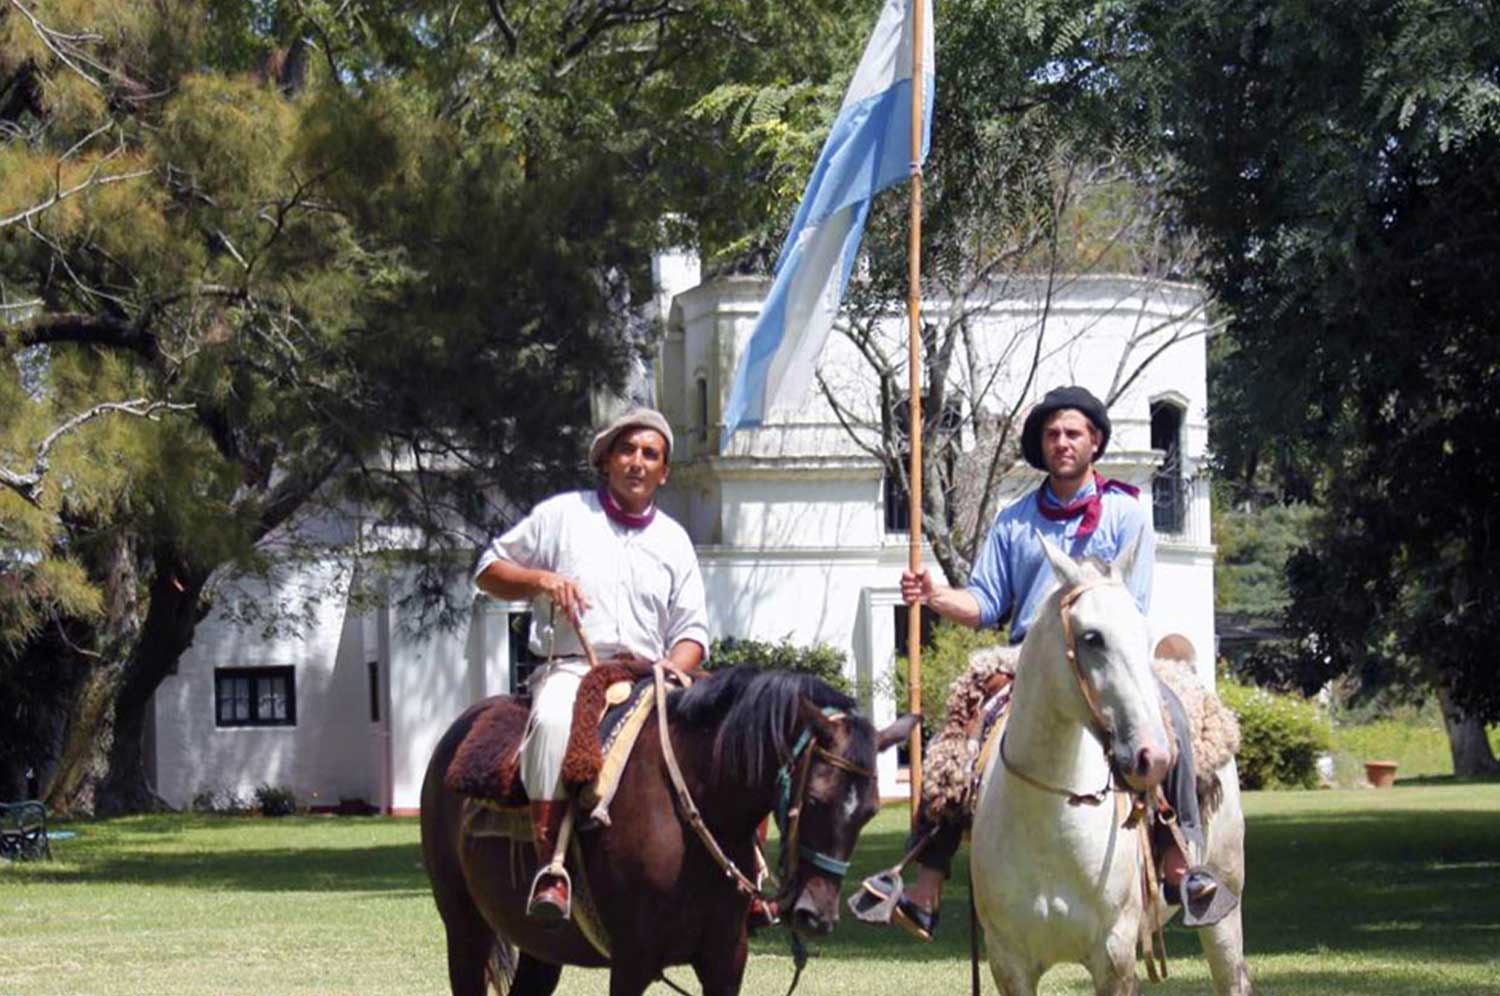 Culture and traditions of gaucho in Argentina